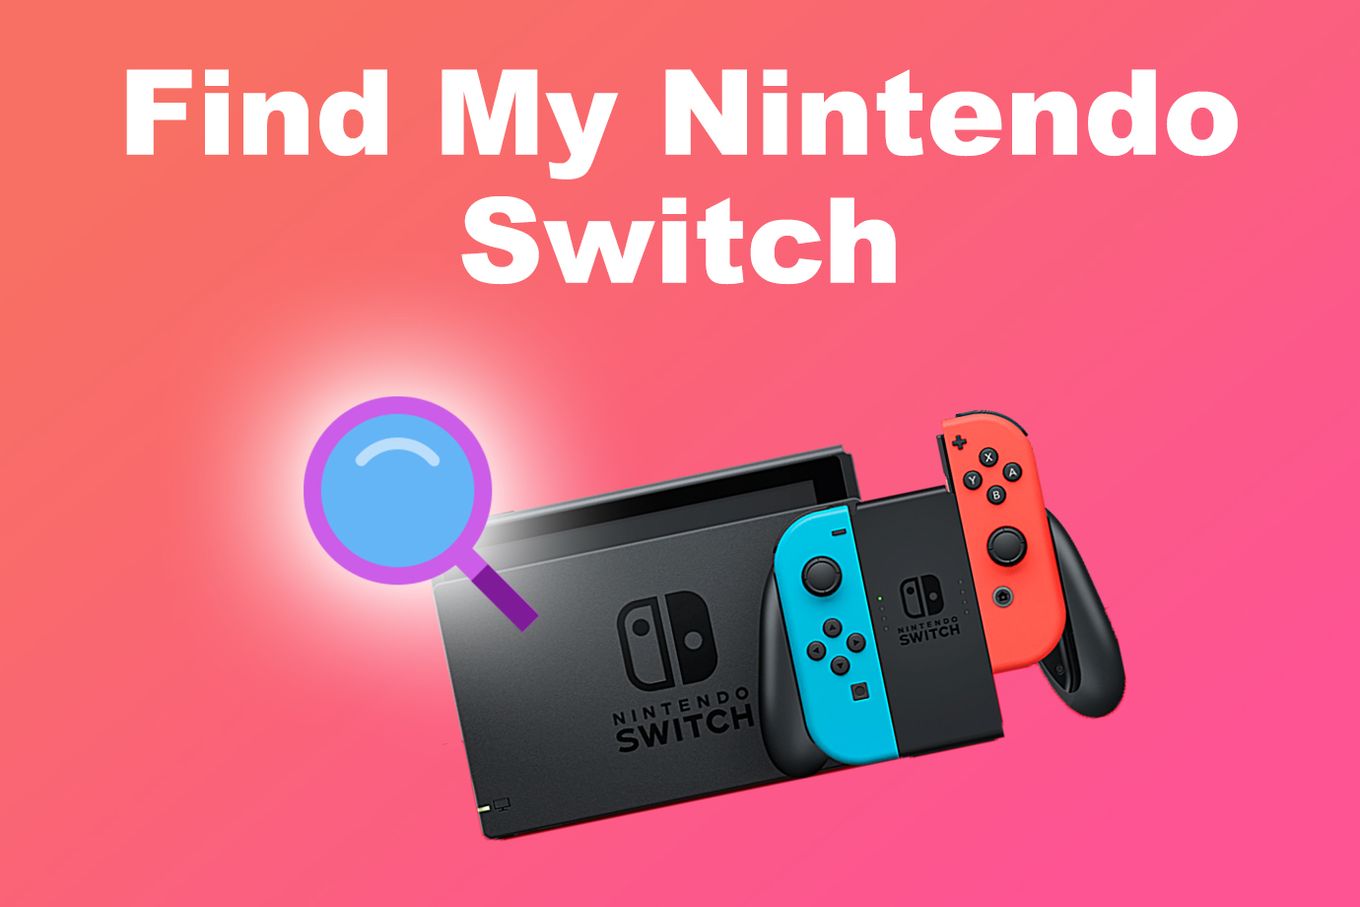 How to Cancel a Nintendo Switch Online Account in 5 Steps